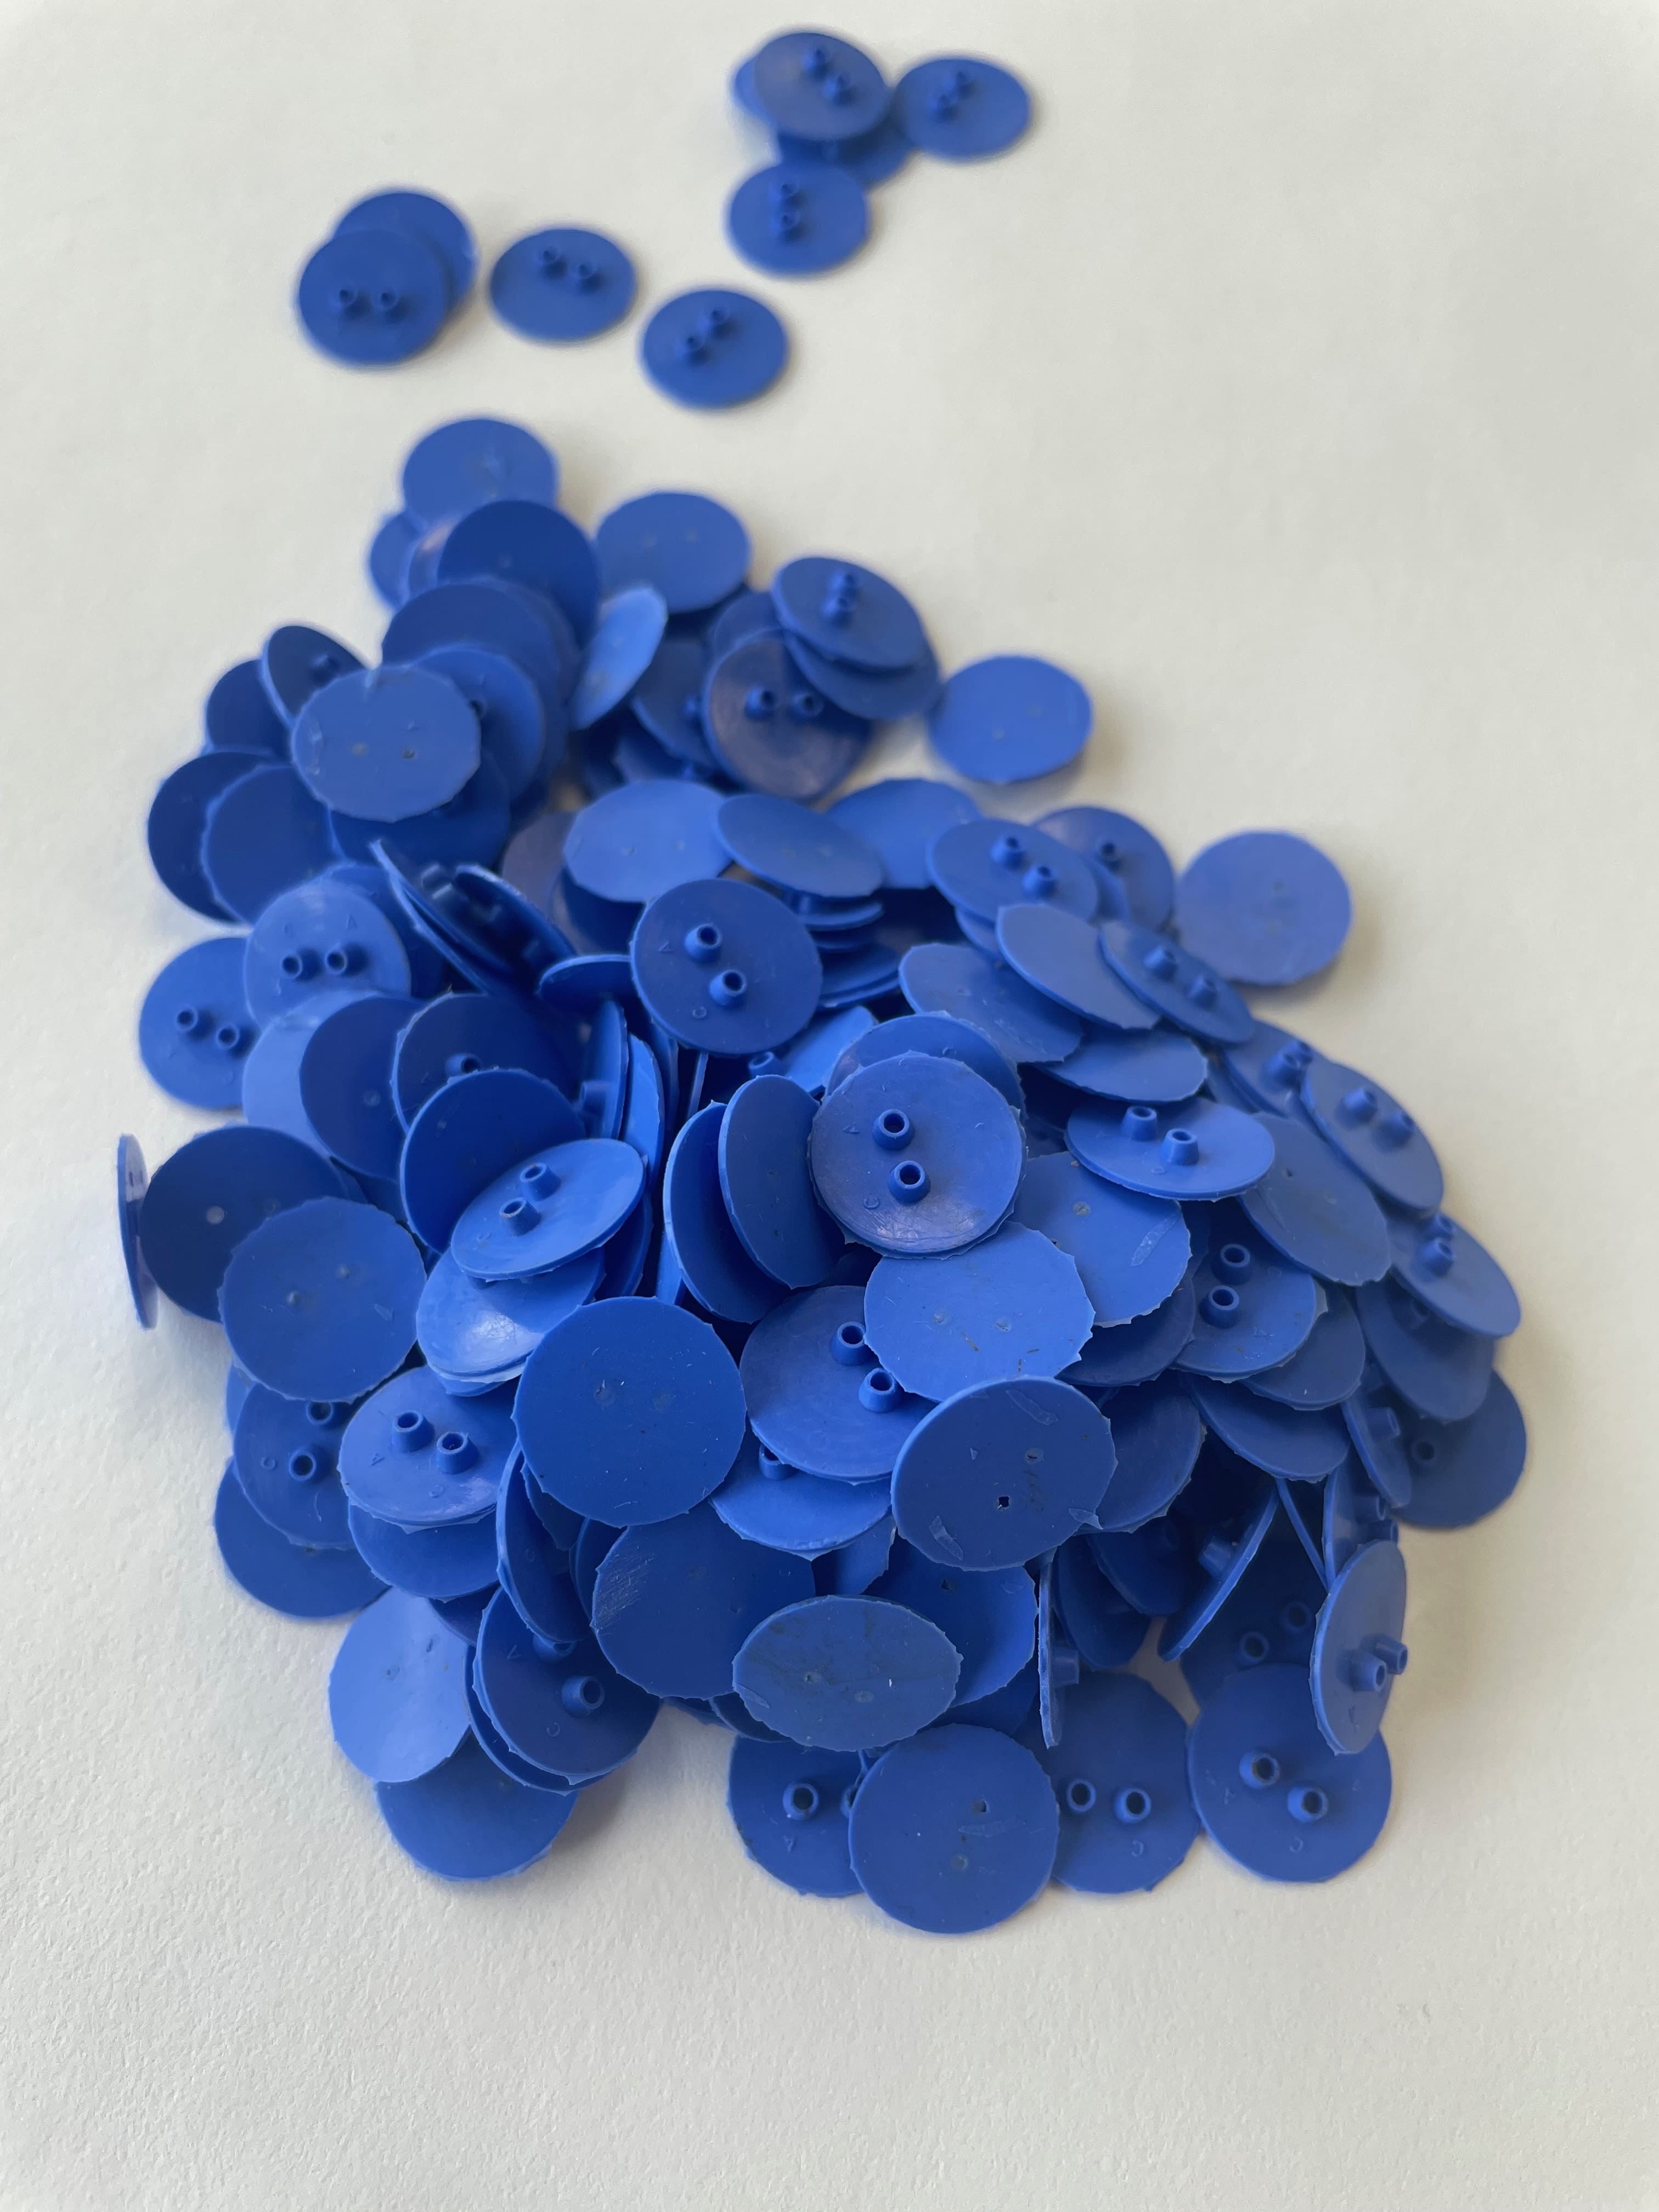 Pile of tiny blue molded rubber circles